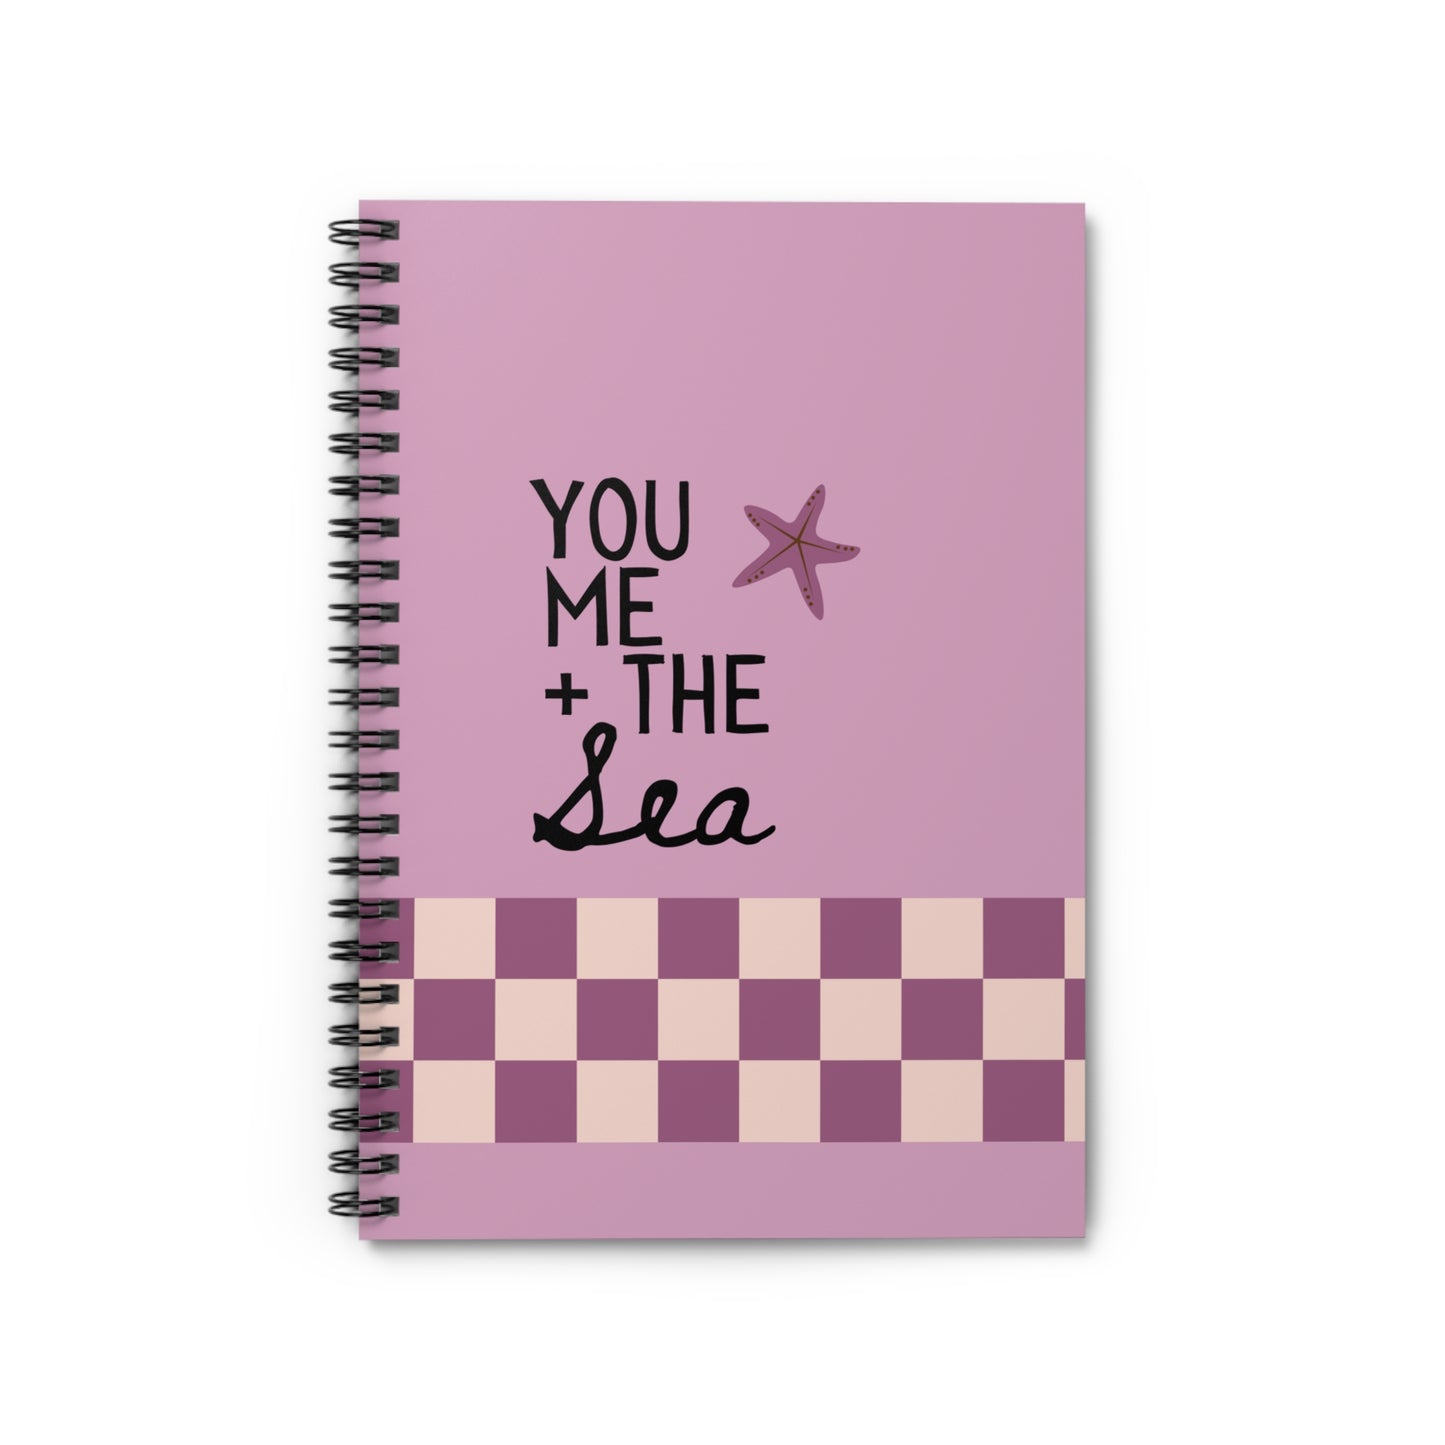 You Me and the Sea Spiral Notebook - Ruled Line